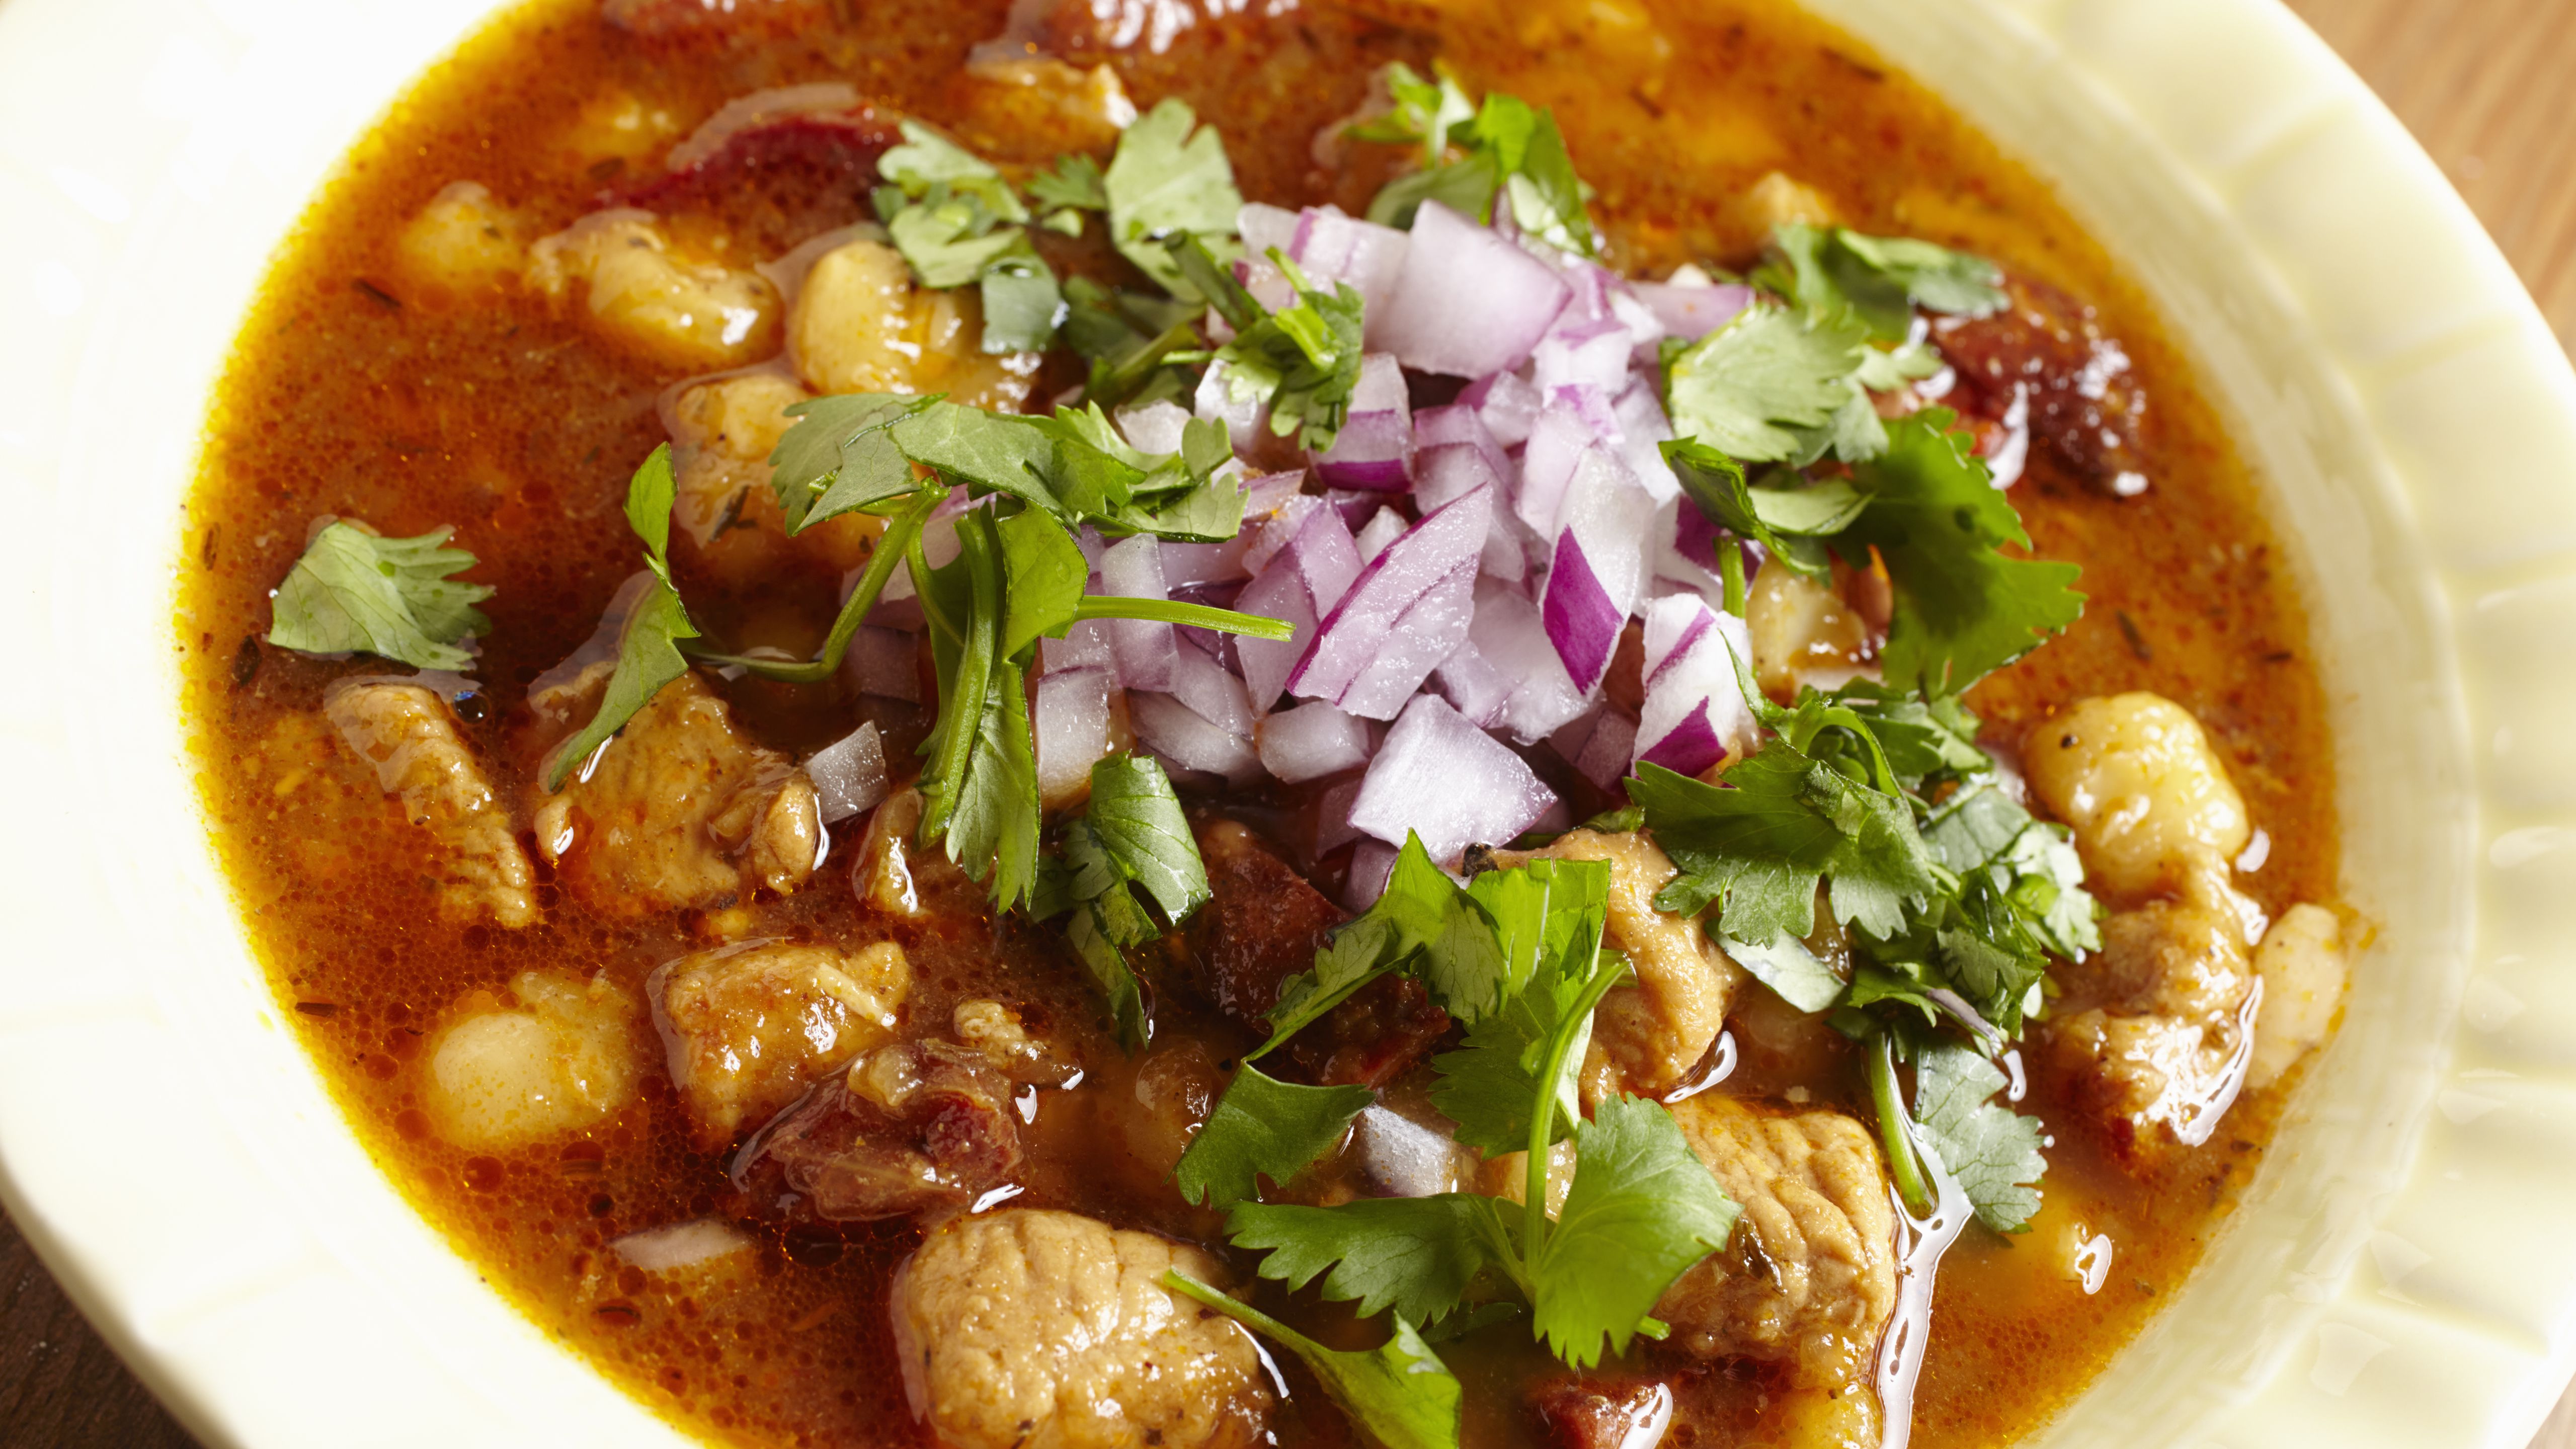 posole--the-mexican-hominy-stew-501436459-59f336a3d088c00010852541.jpg